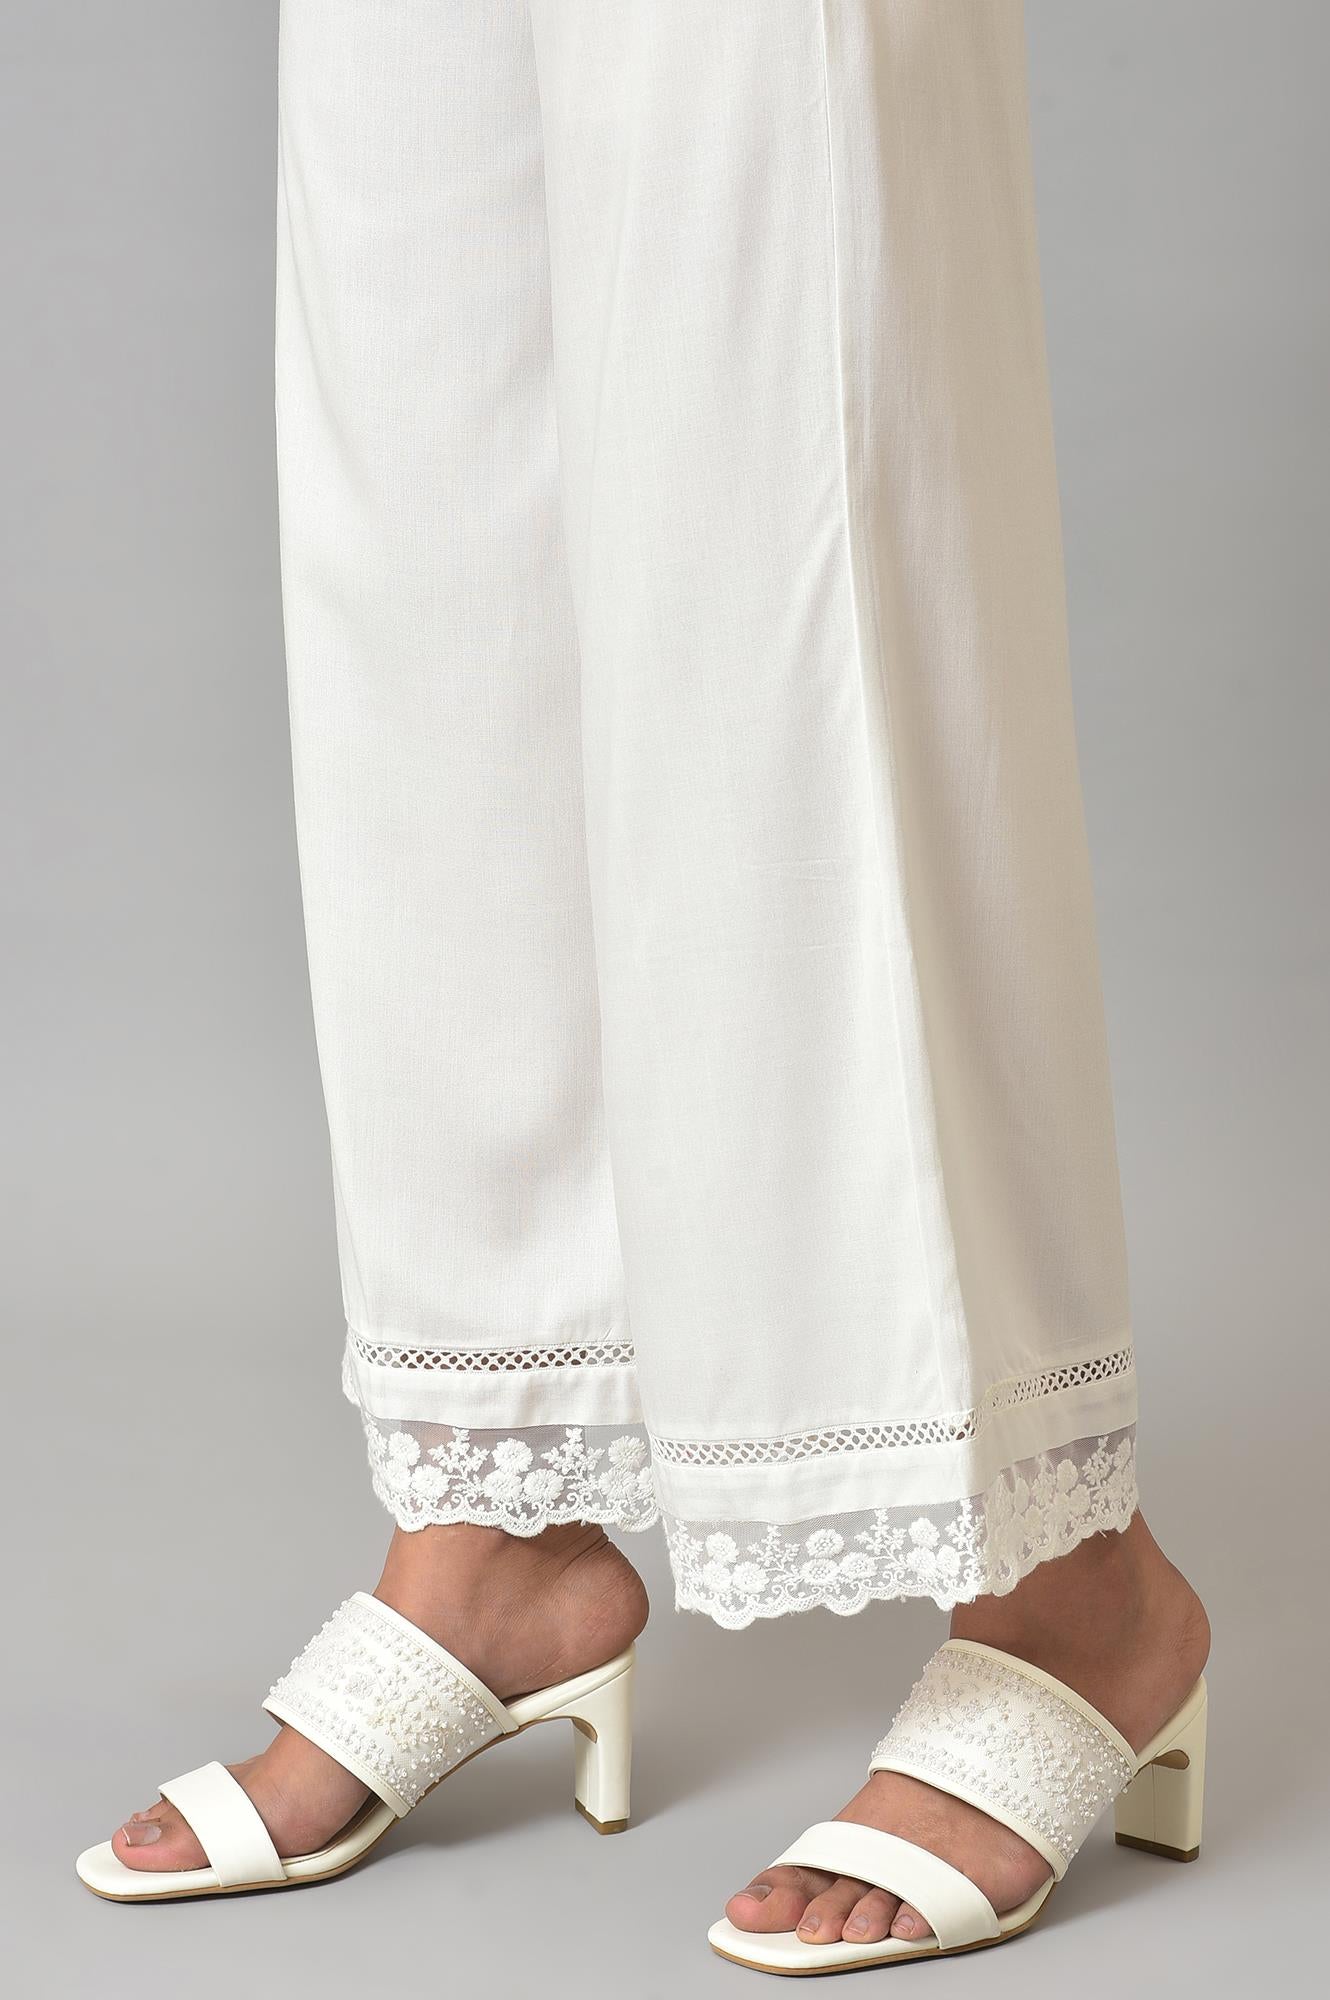 Ecru Parallel Pants With Lace At Hemline